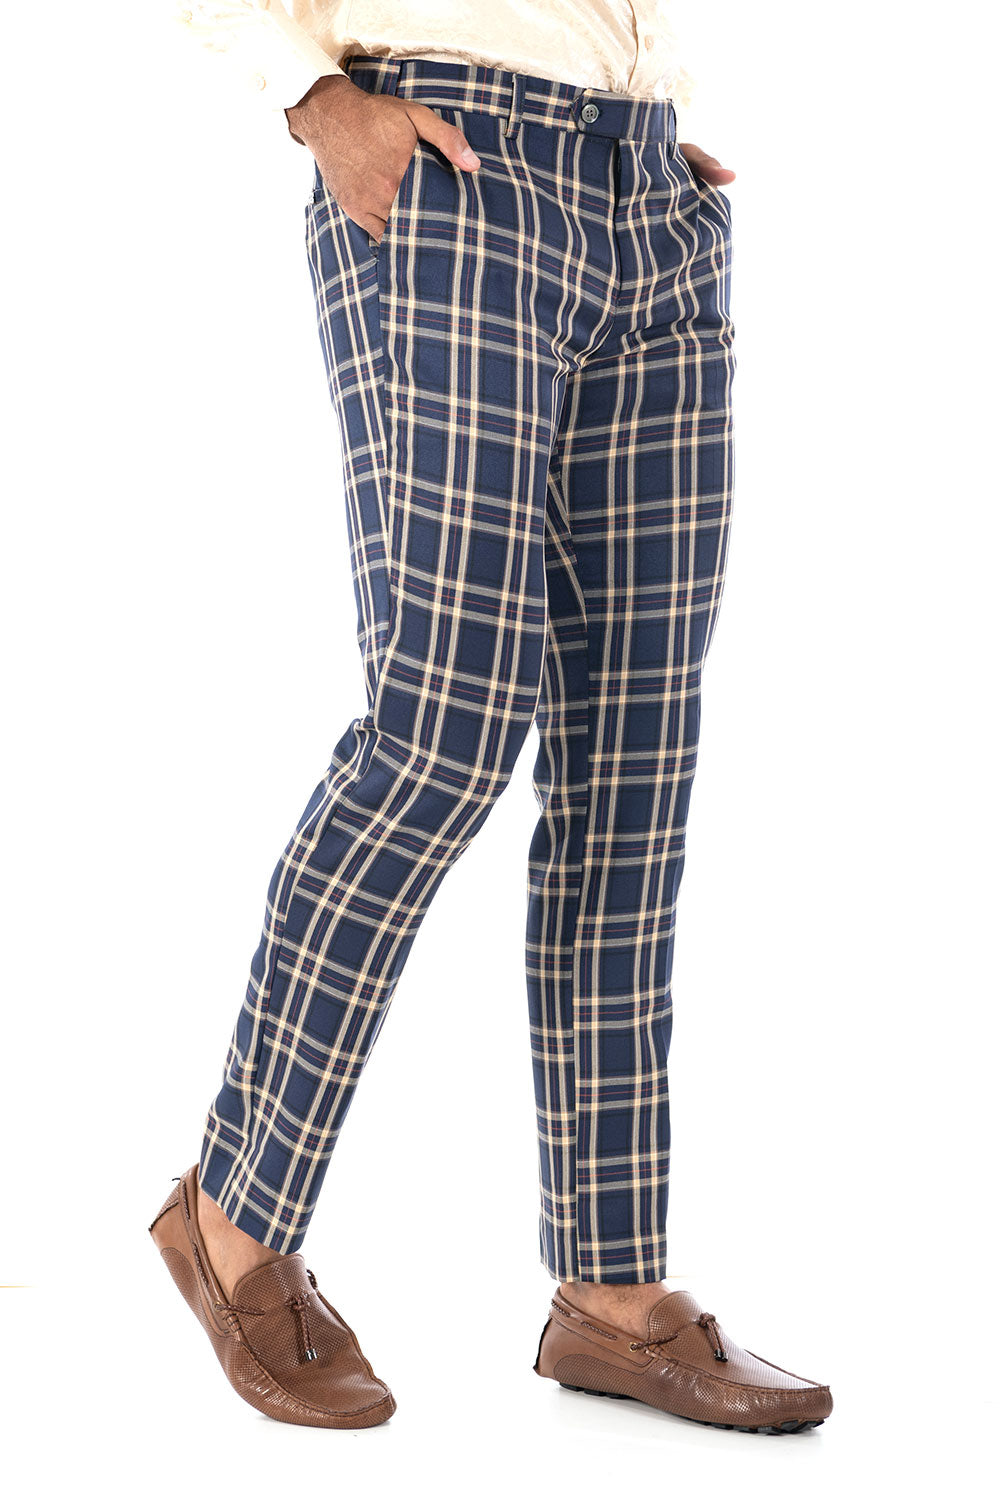 BARABAS men's checkered plaid navy and beige chino pants CP61